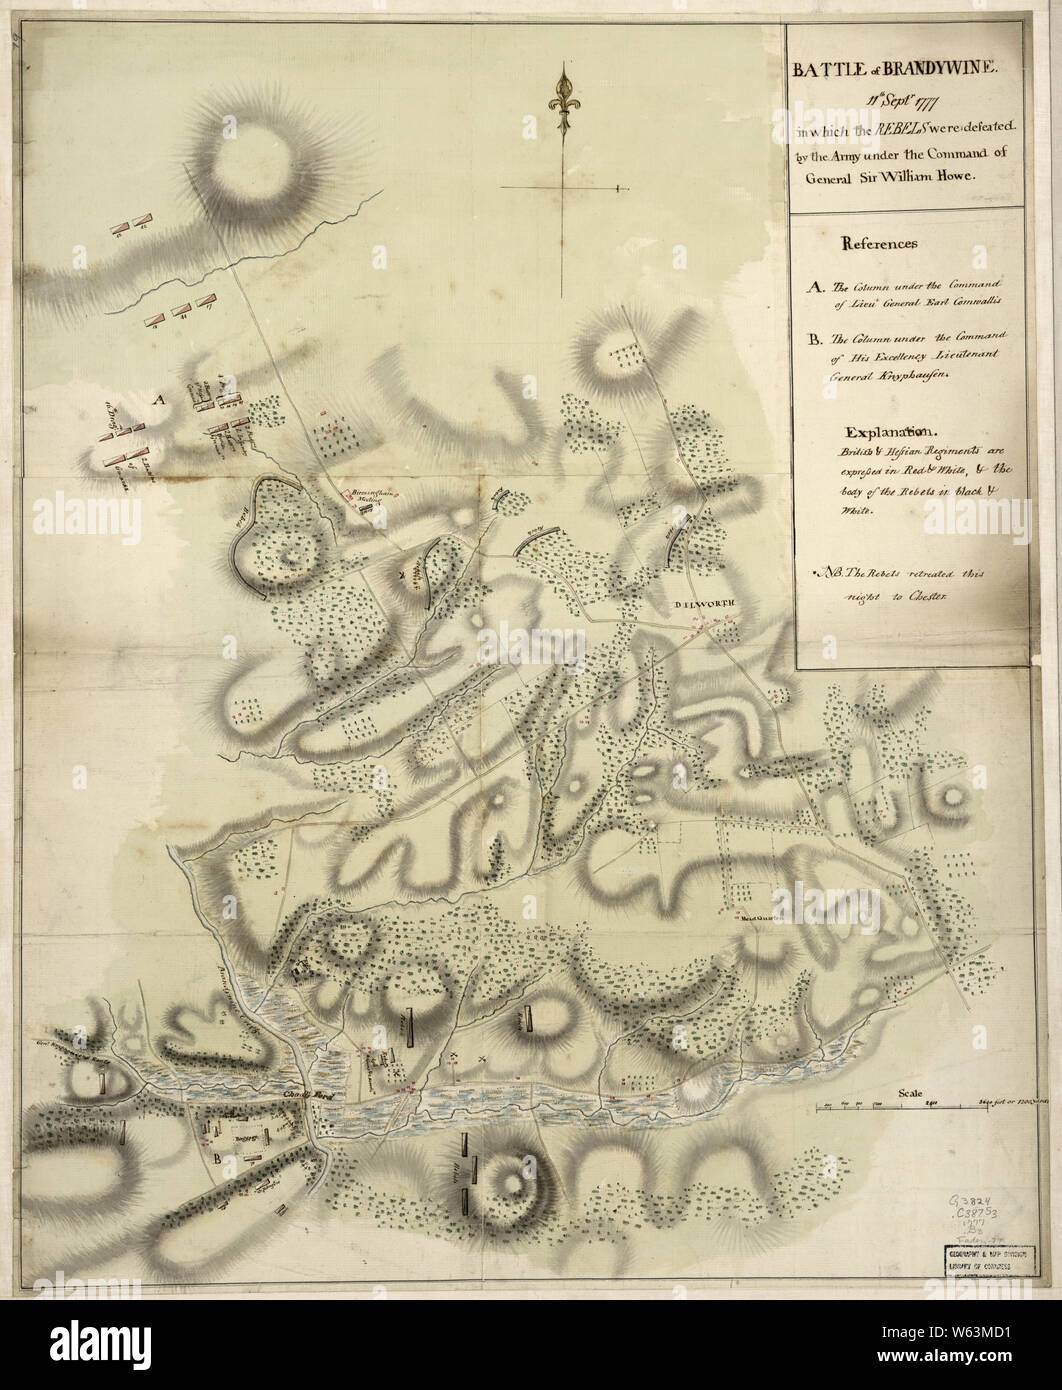 American Revolutionary War Era Maps 1750-1786 324 Battle of Brandywine 11th Septr 1777 in which the rebels were defeated by the army under the command of Rebuild and Repair Stock Photo